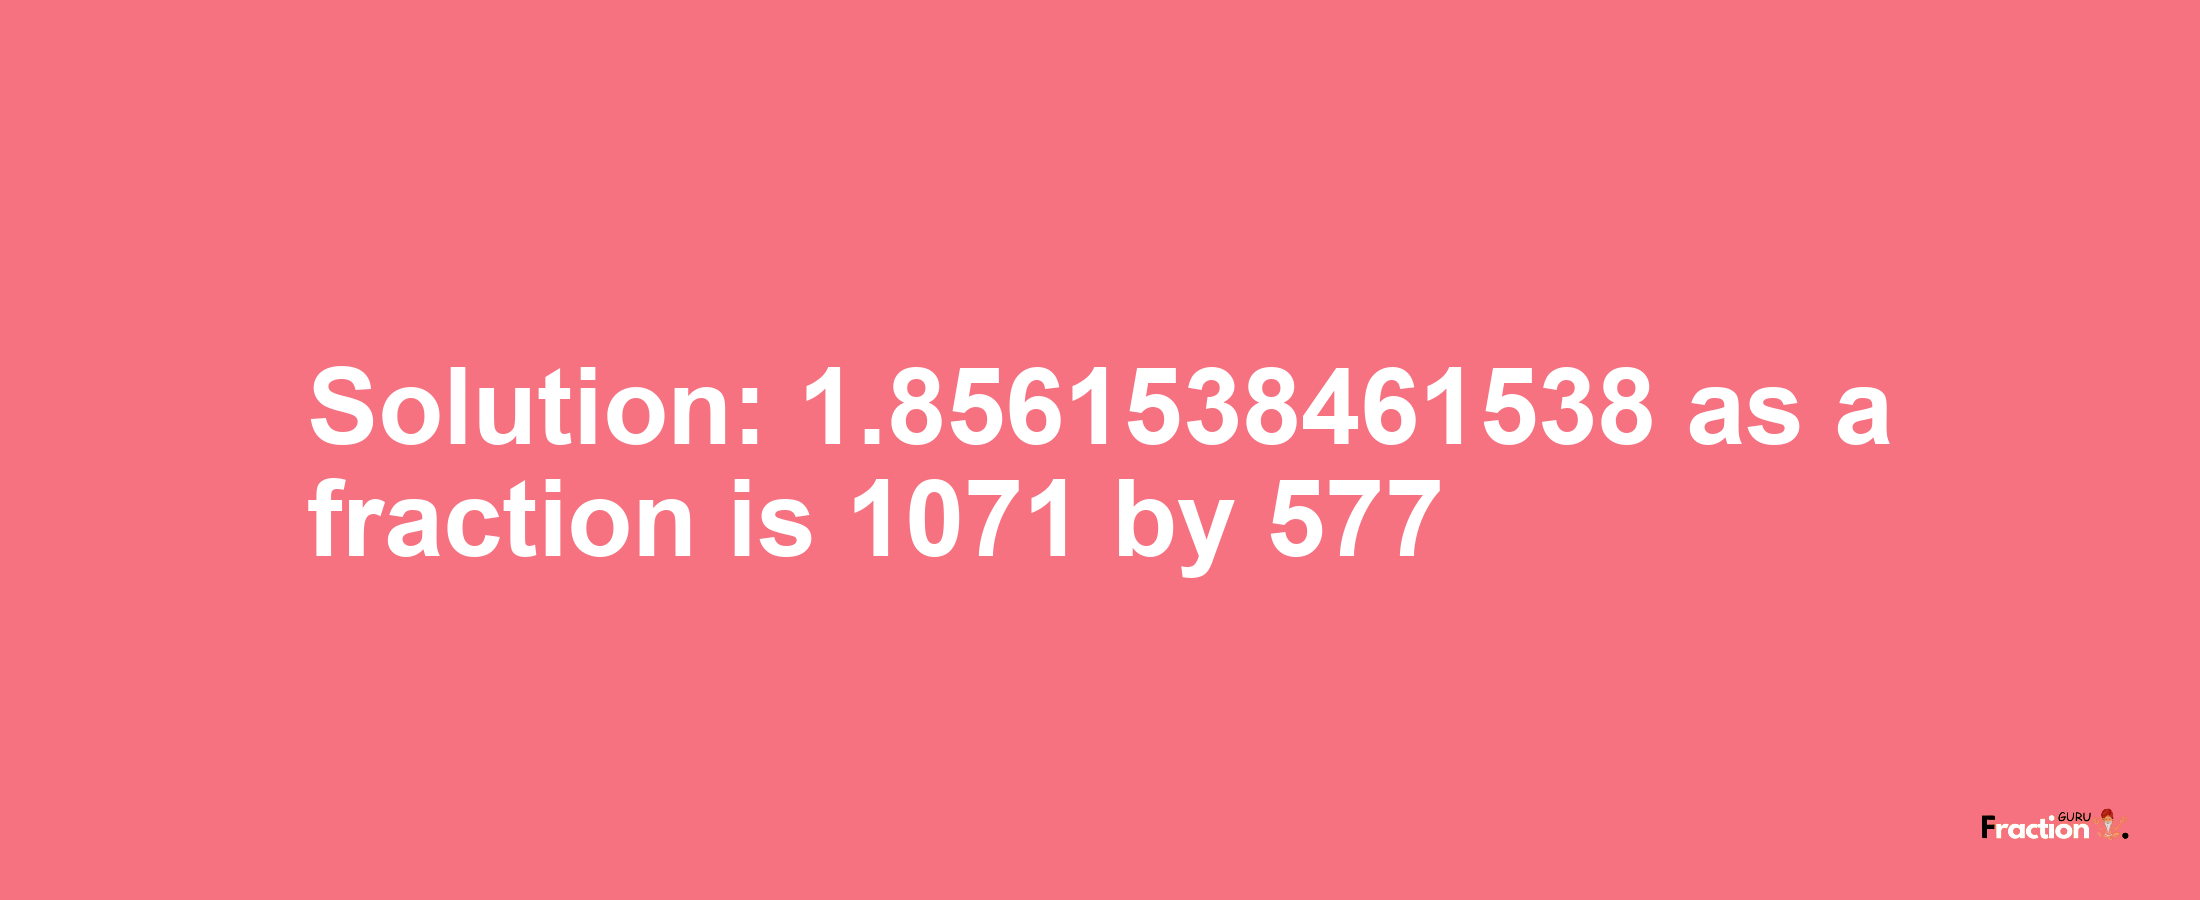 Solution:1.8561538461538 as a fraction is 1071/577